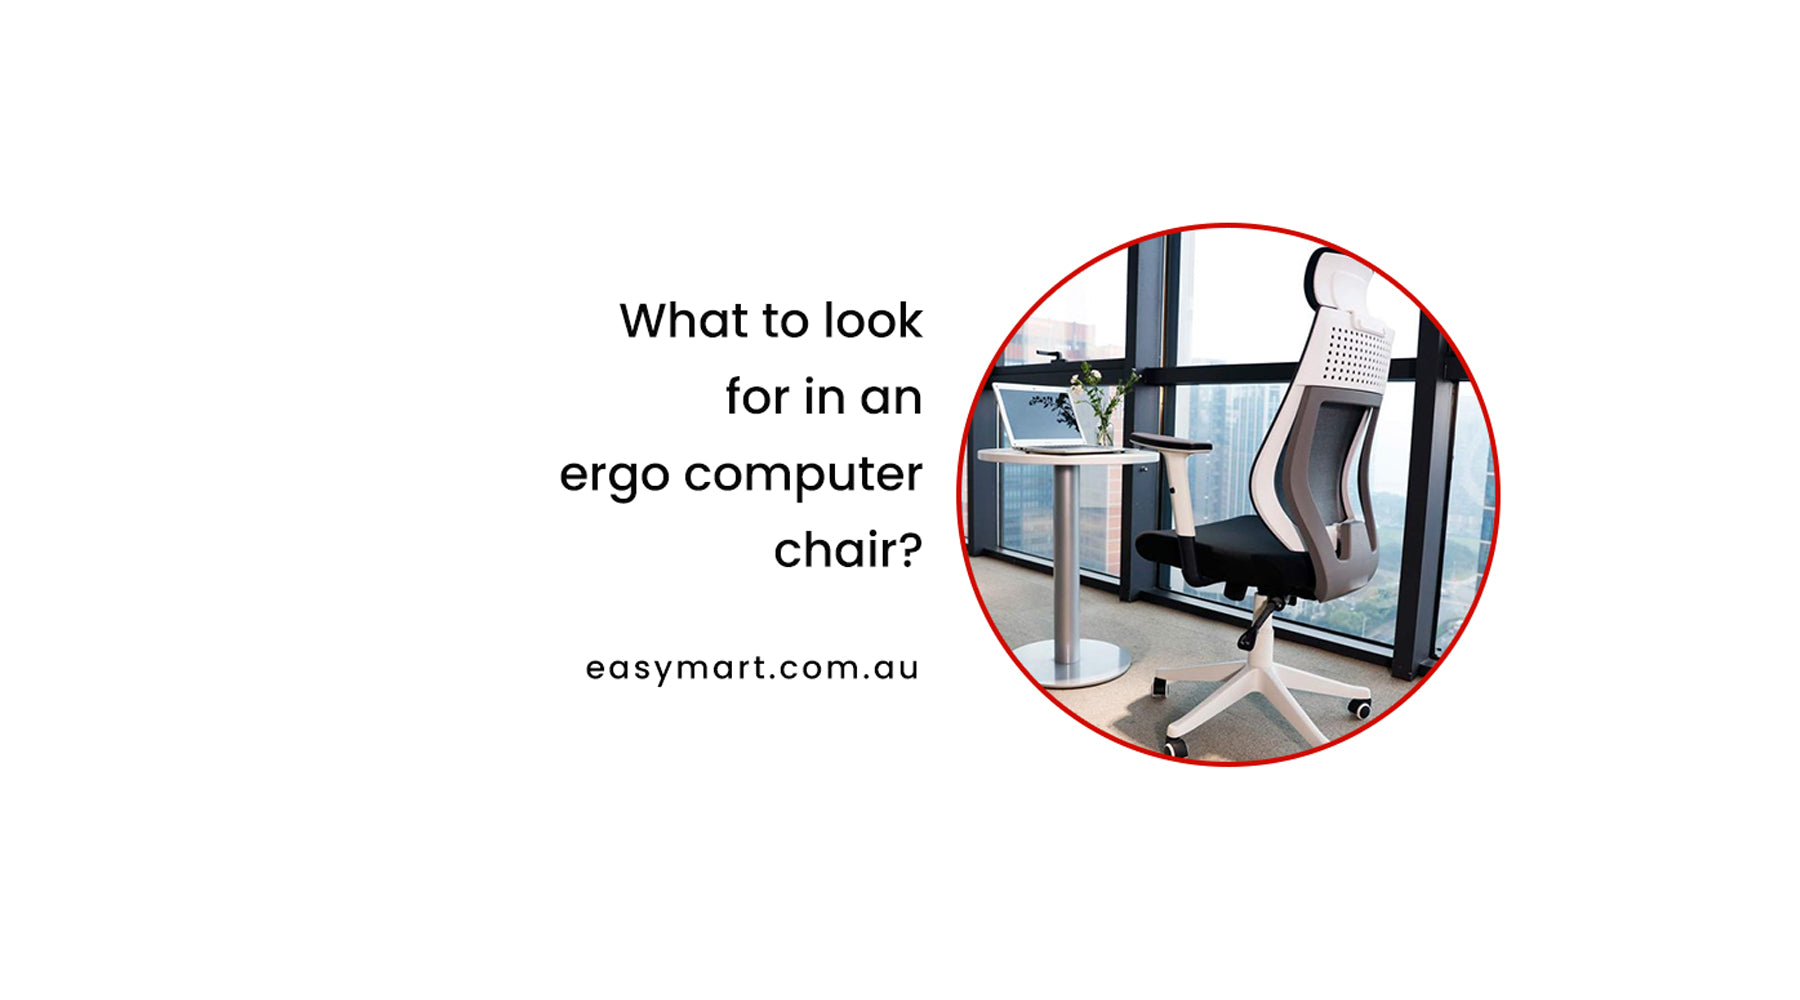 What to look for in an ergo computer chair?